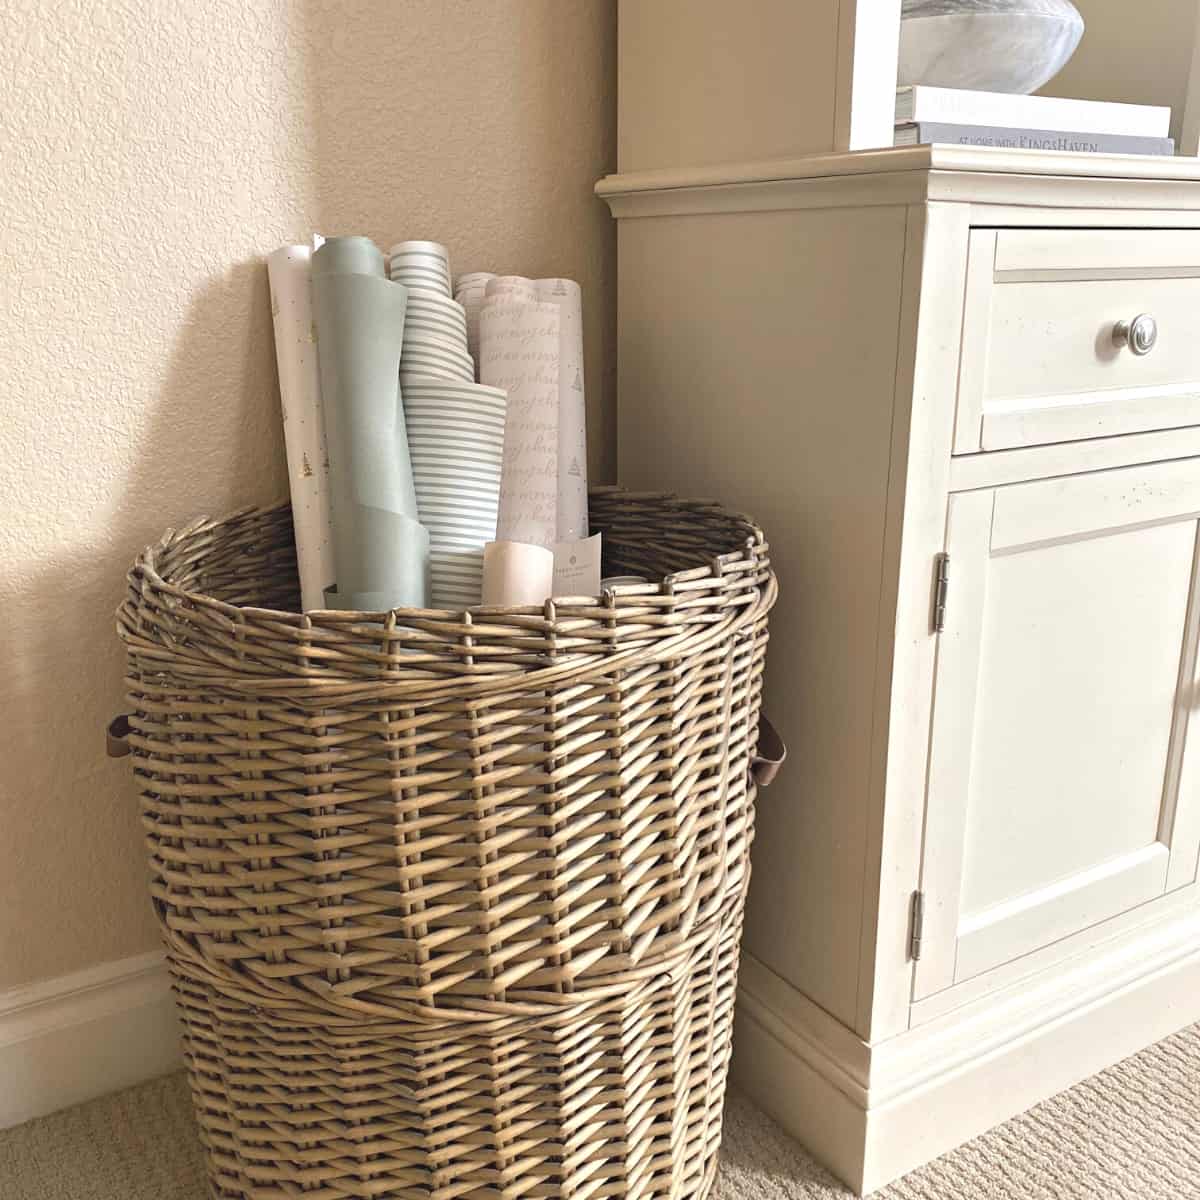 Wrapping paper in a tall woven basket